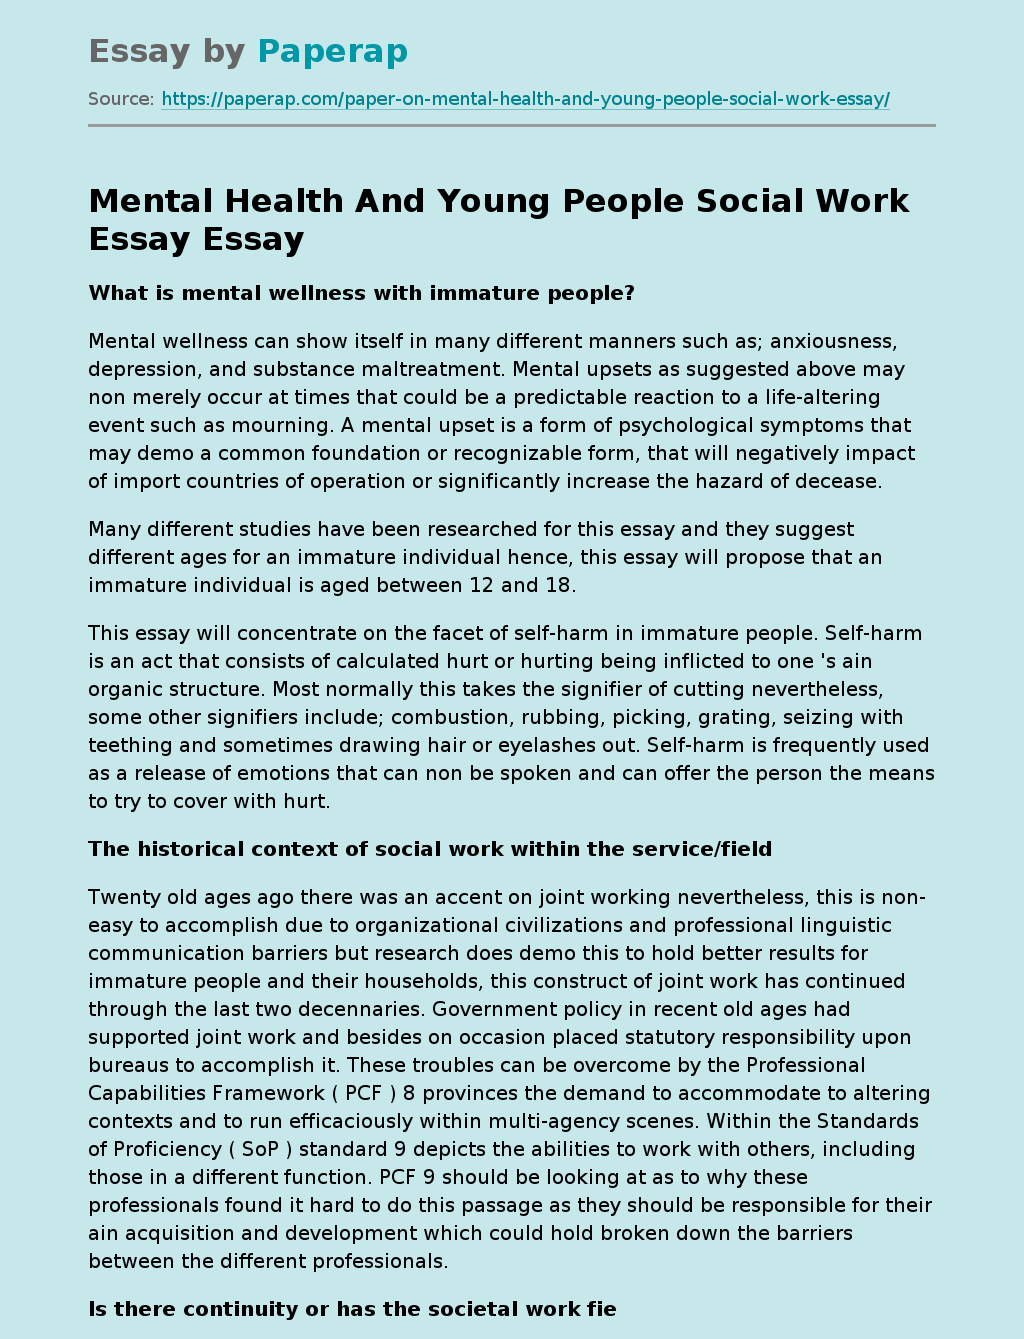 Mental Health And Young People Social Work Essay